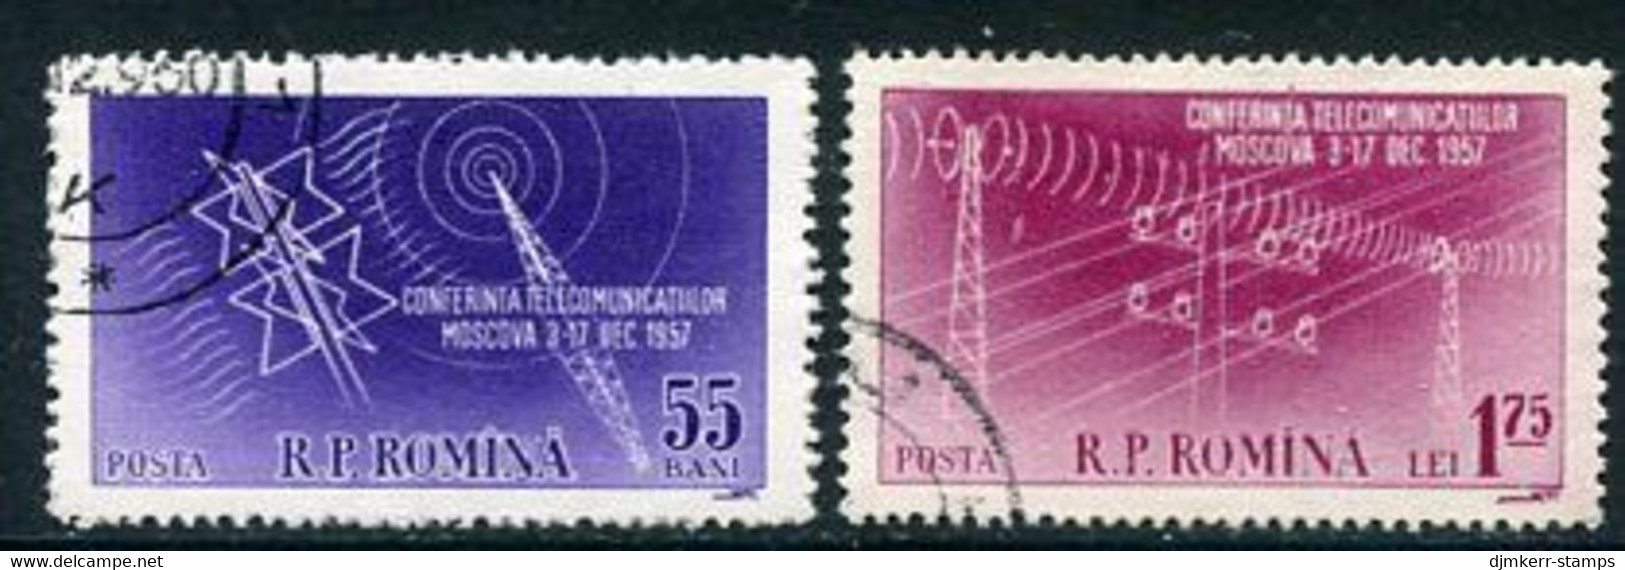 ROMANIA 1958 Postal Ministers' Conference  Used.  Michel 1699-700 - Used Stamps